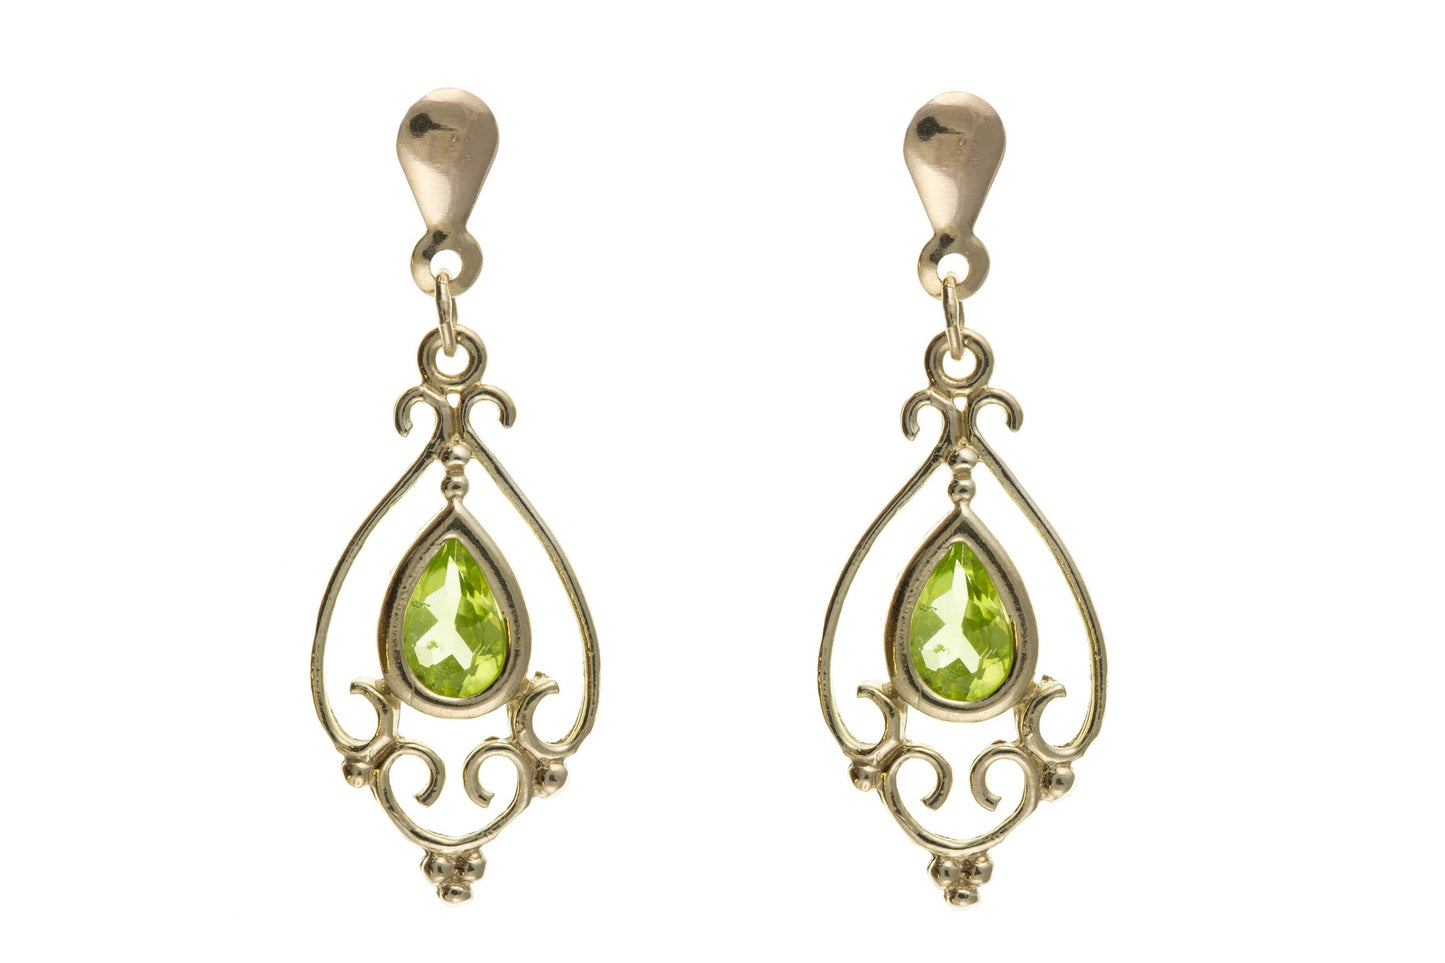 Solid 9ct Yellow Gold Vintage Victorian Real Peridot Drop Earrings August Birthstone